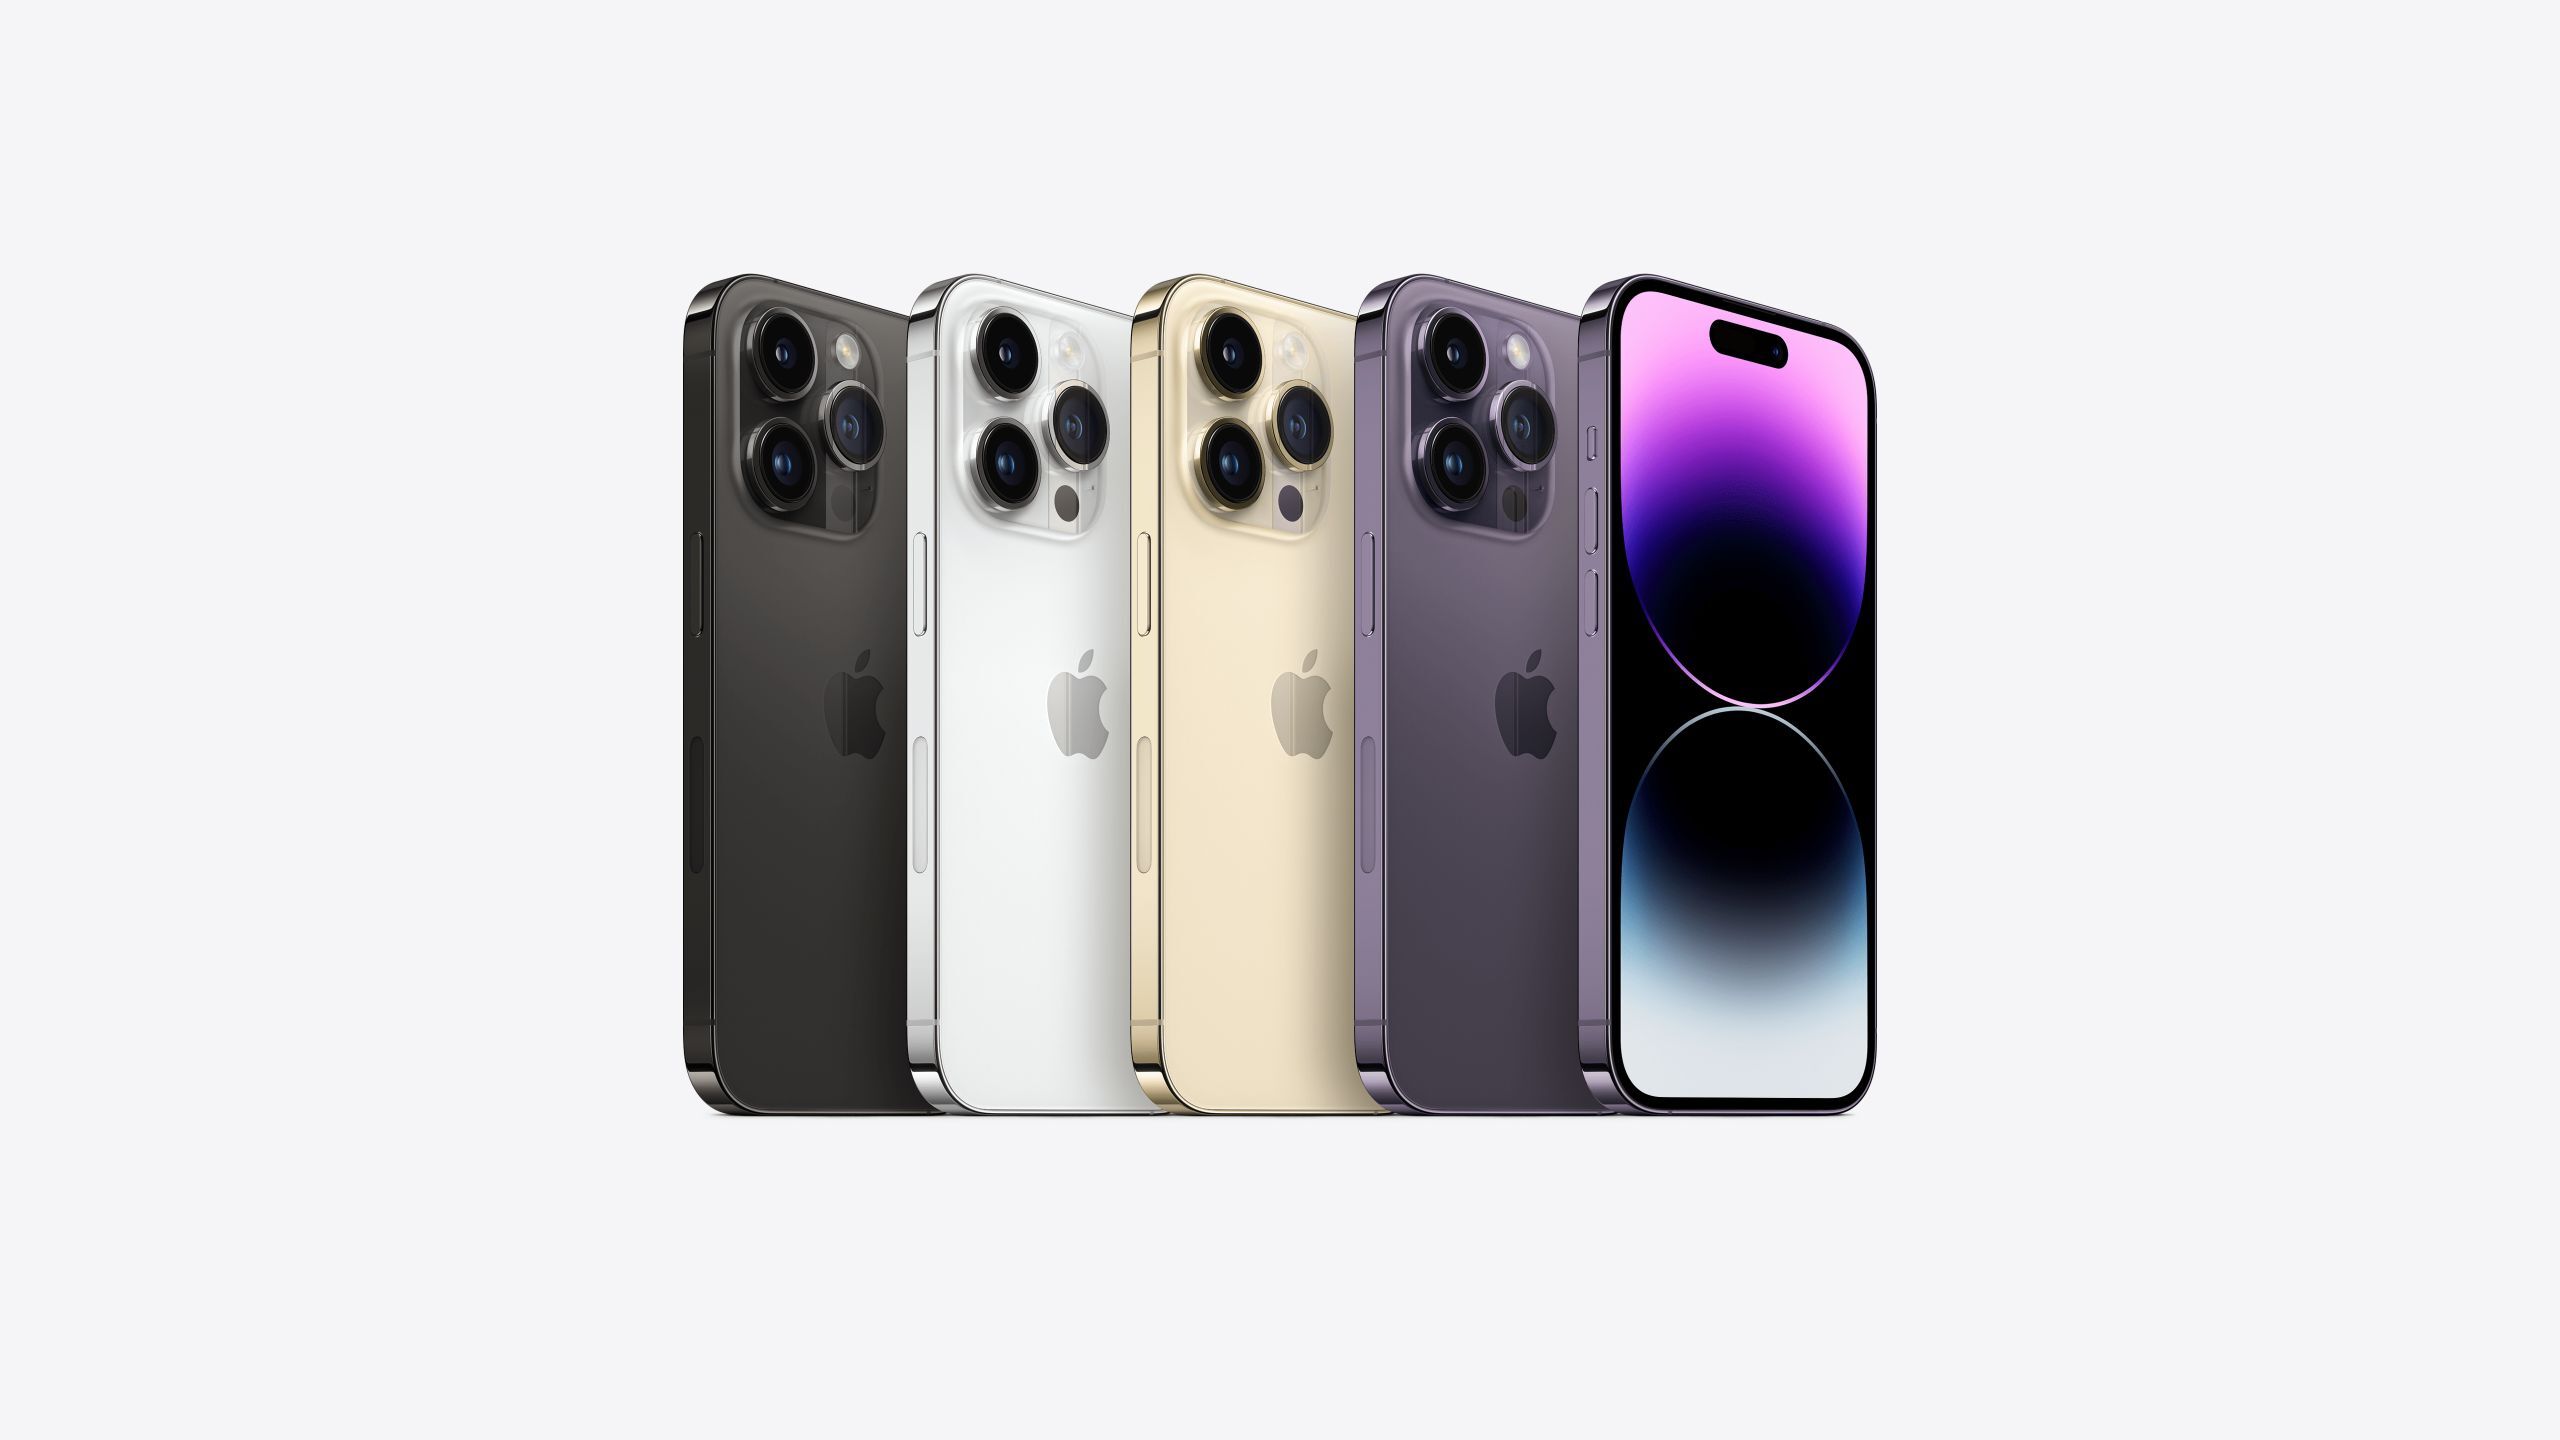 Apple iPhone 14 Pro and Pro Max color options